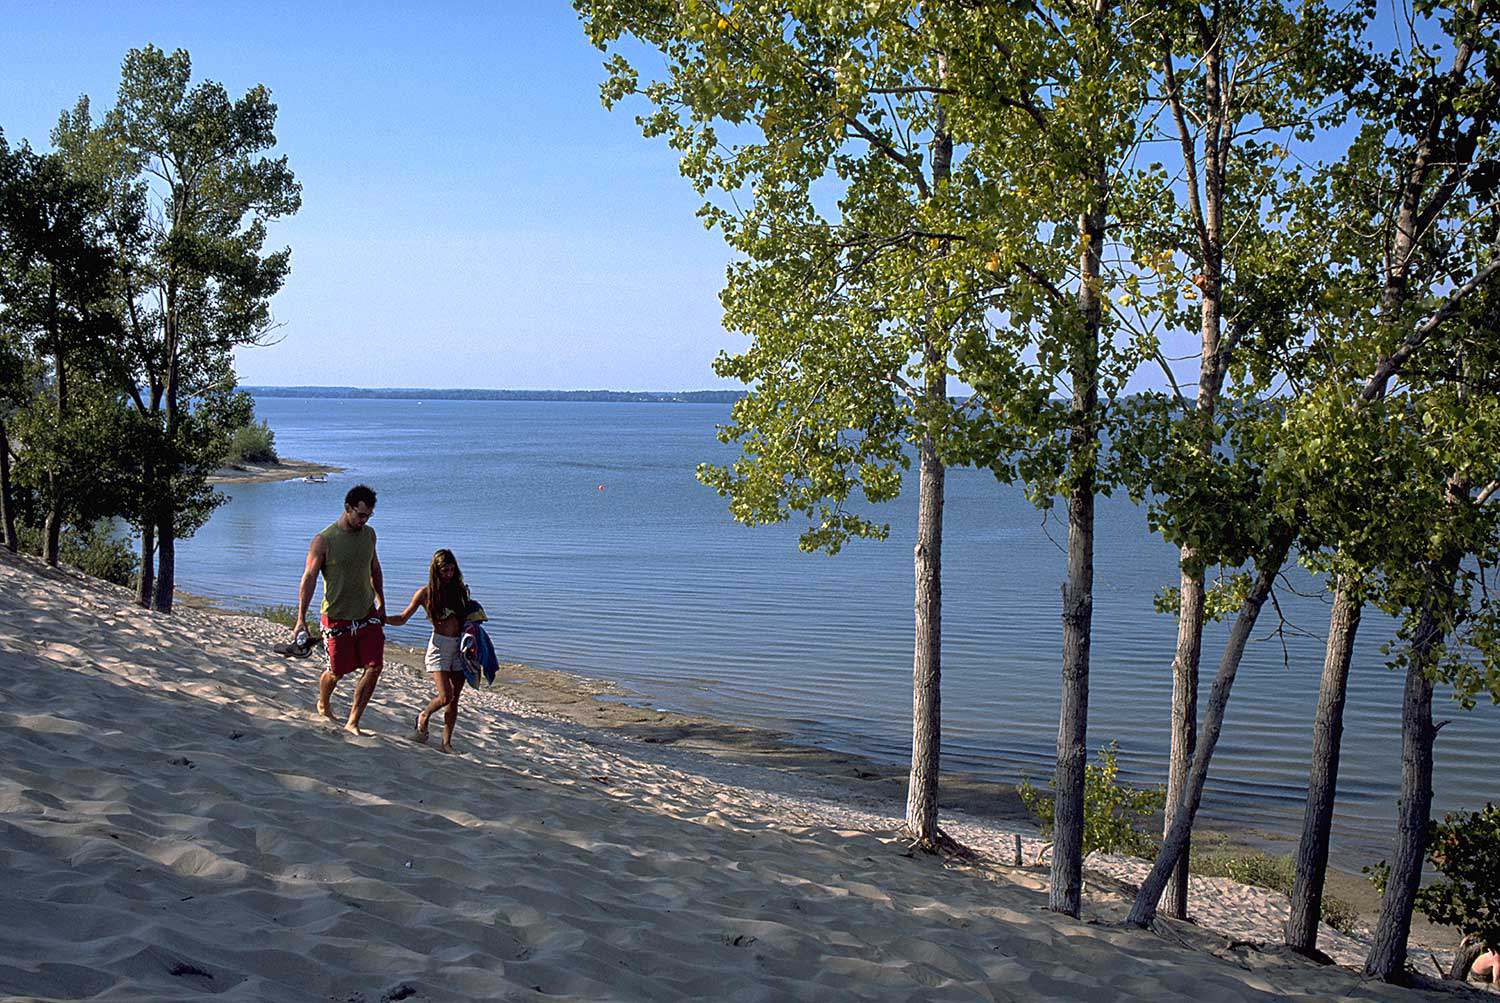 Sandbanks Provincial Park contains two of the largest freshwater sandbars in the world (© Ontario Tourism, 2009)